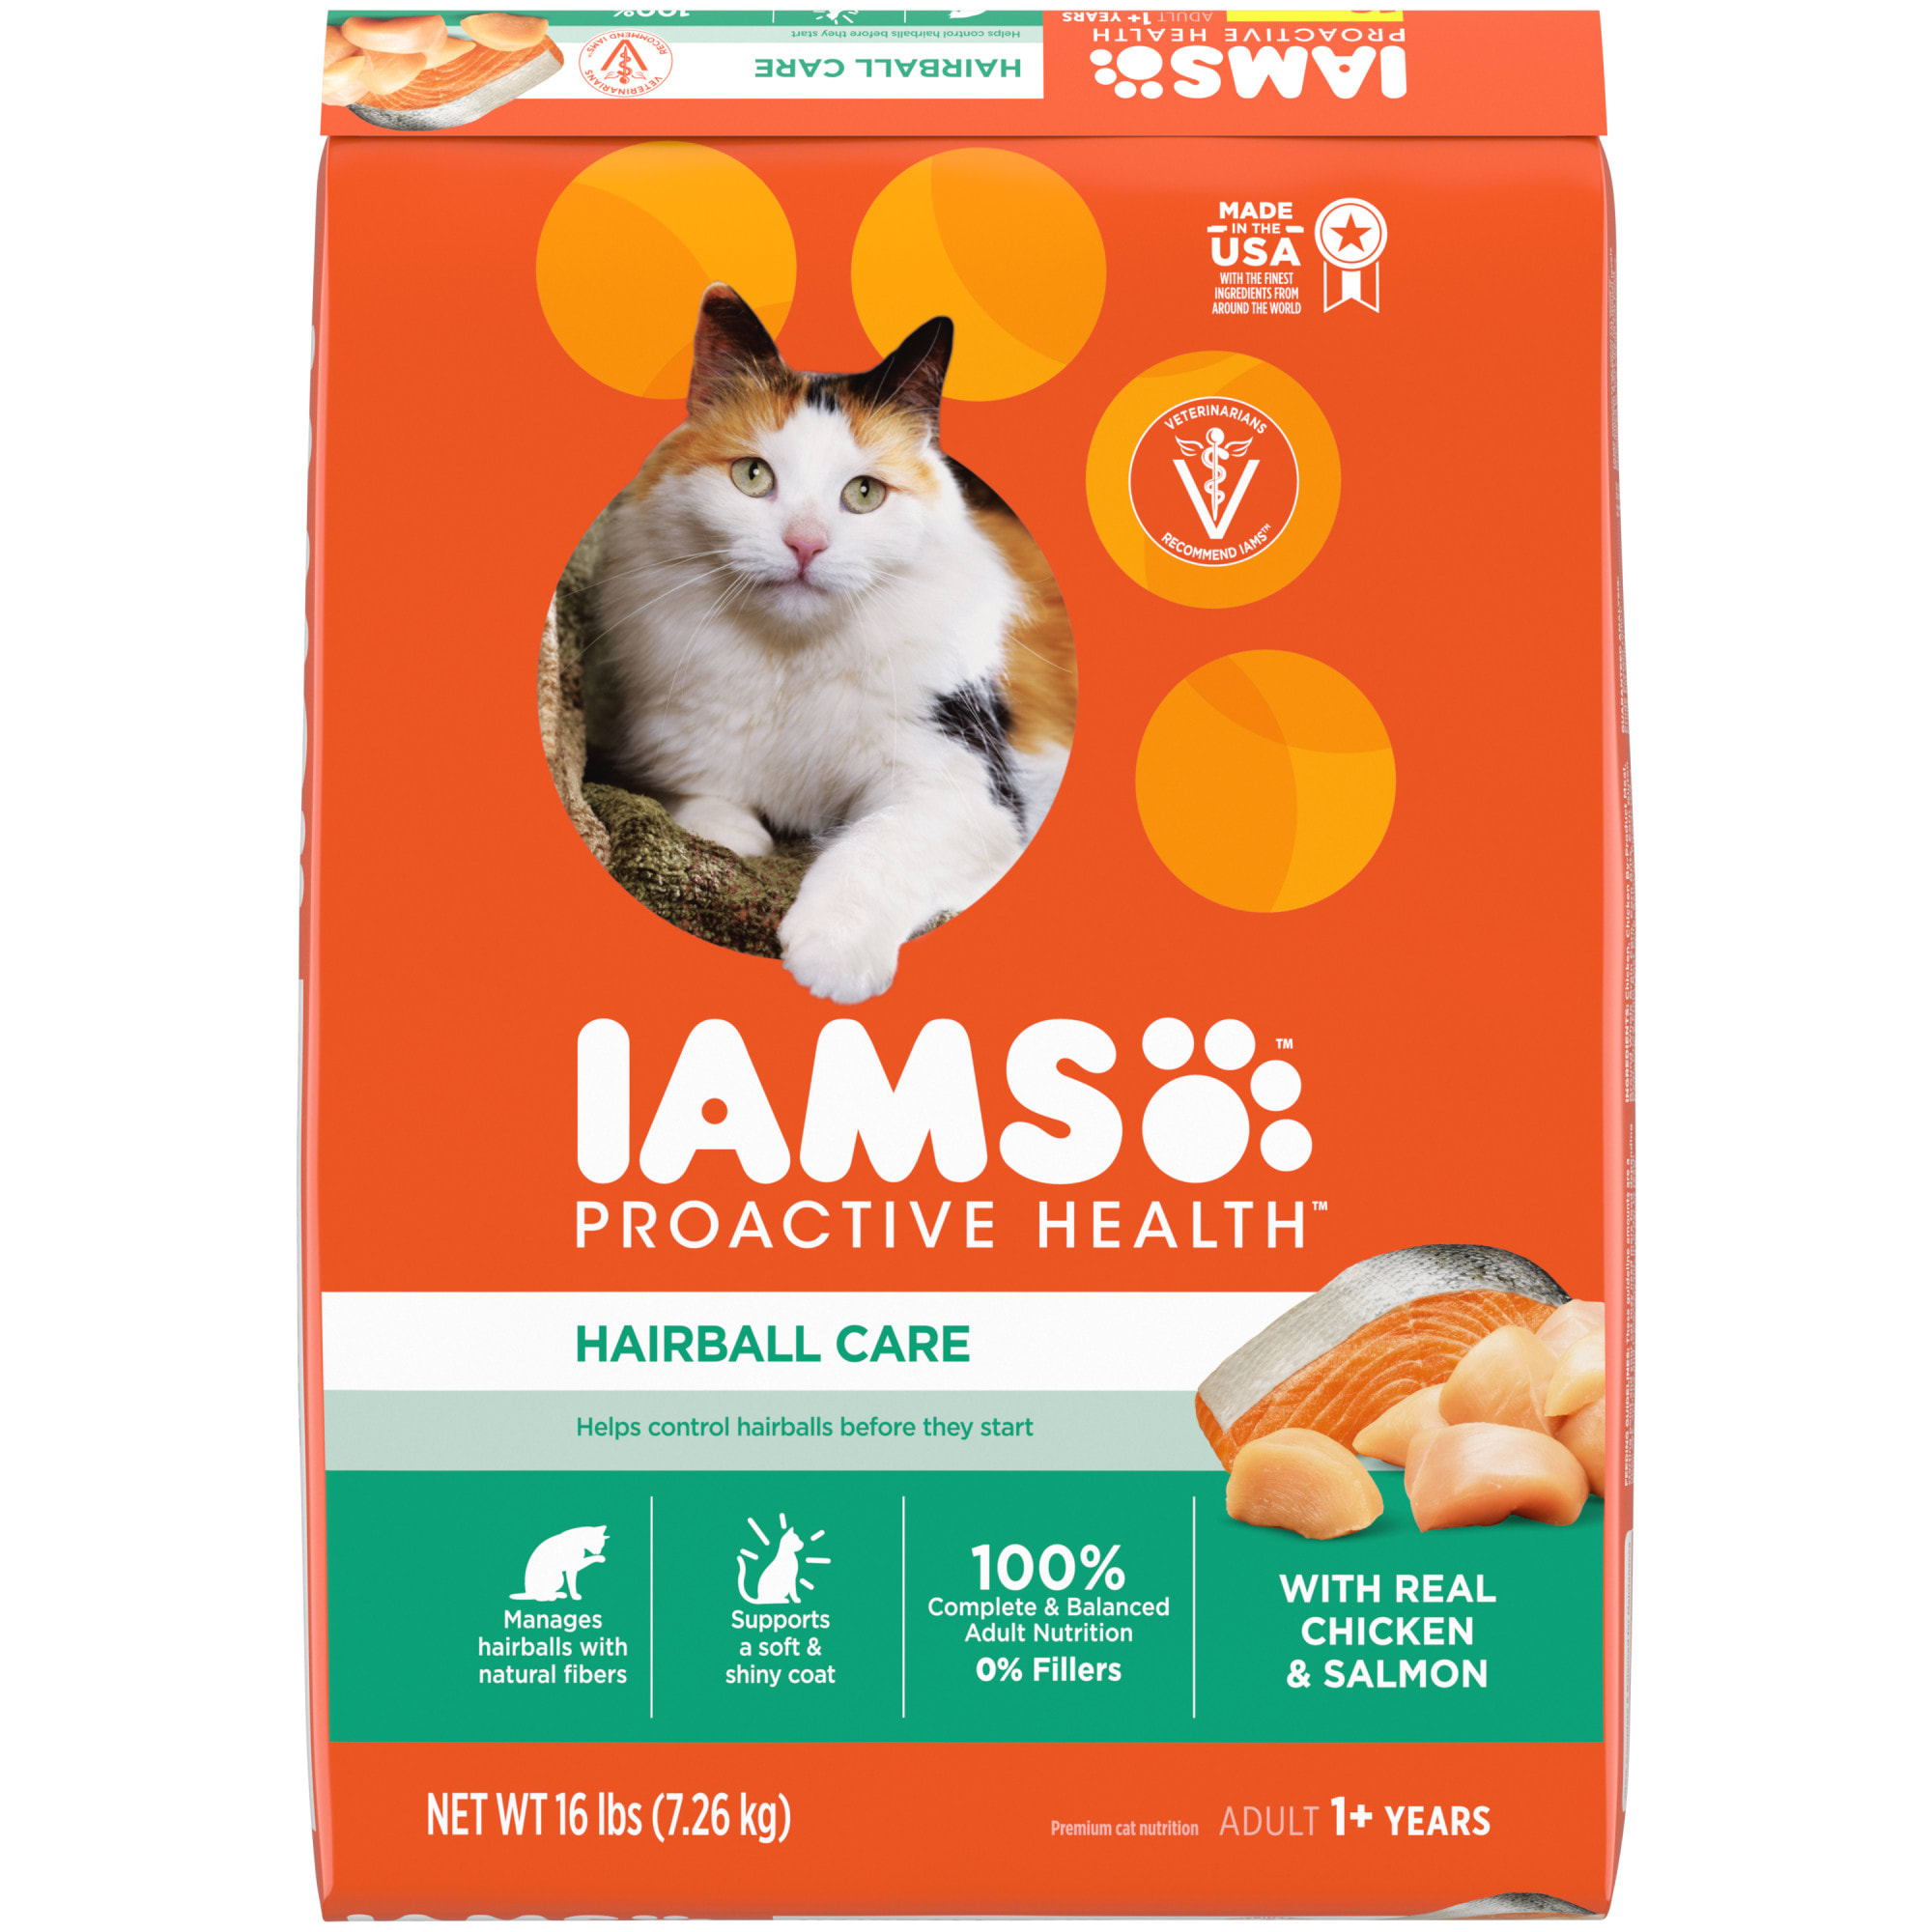 UPC 019014611911 product image for Iams ProActive Health Hairball Care Chicken and Salmon Adult Dry Cat Food, 16 lb | upcitemdb.com